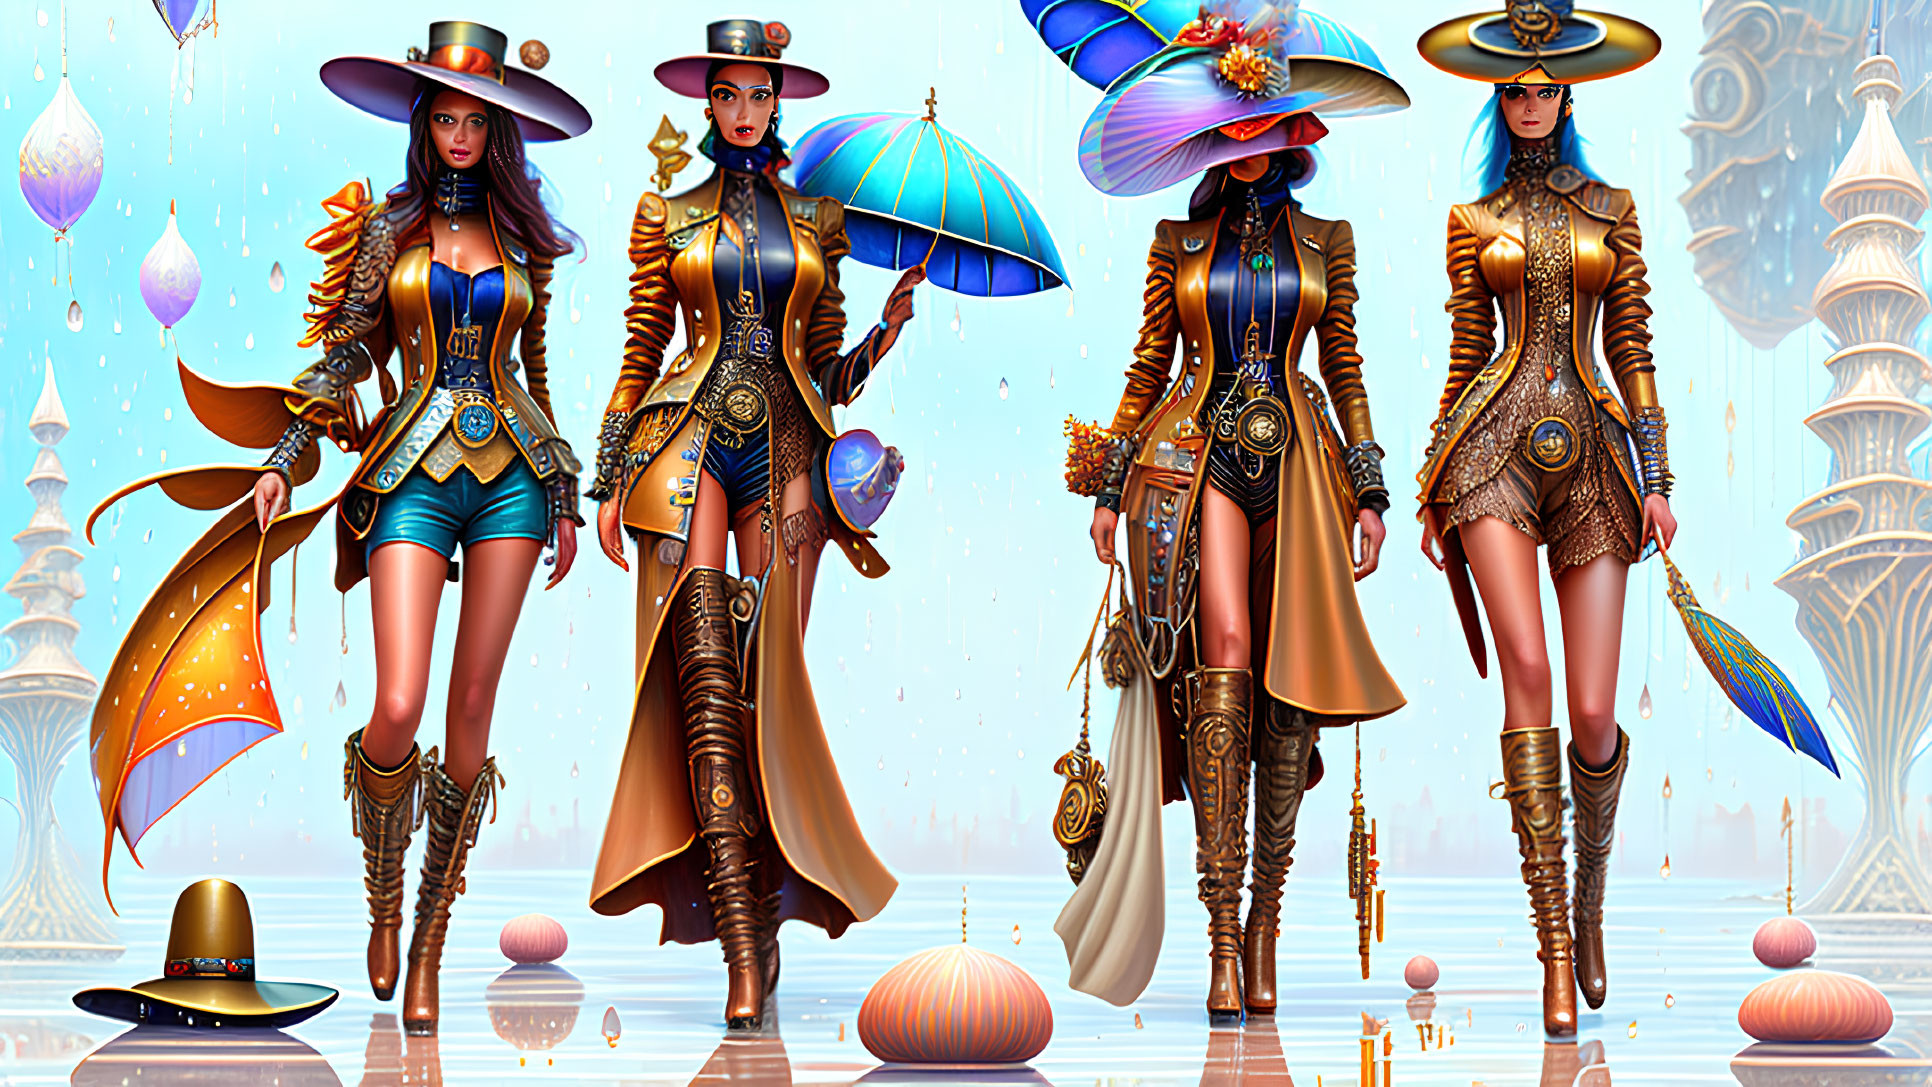 Four Female Characters in Steampunk-Inspired Outfits with Fantastical Architecture and Floating Bal